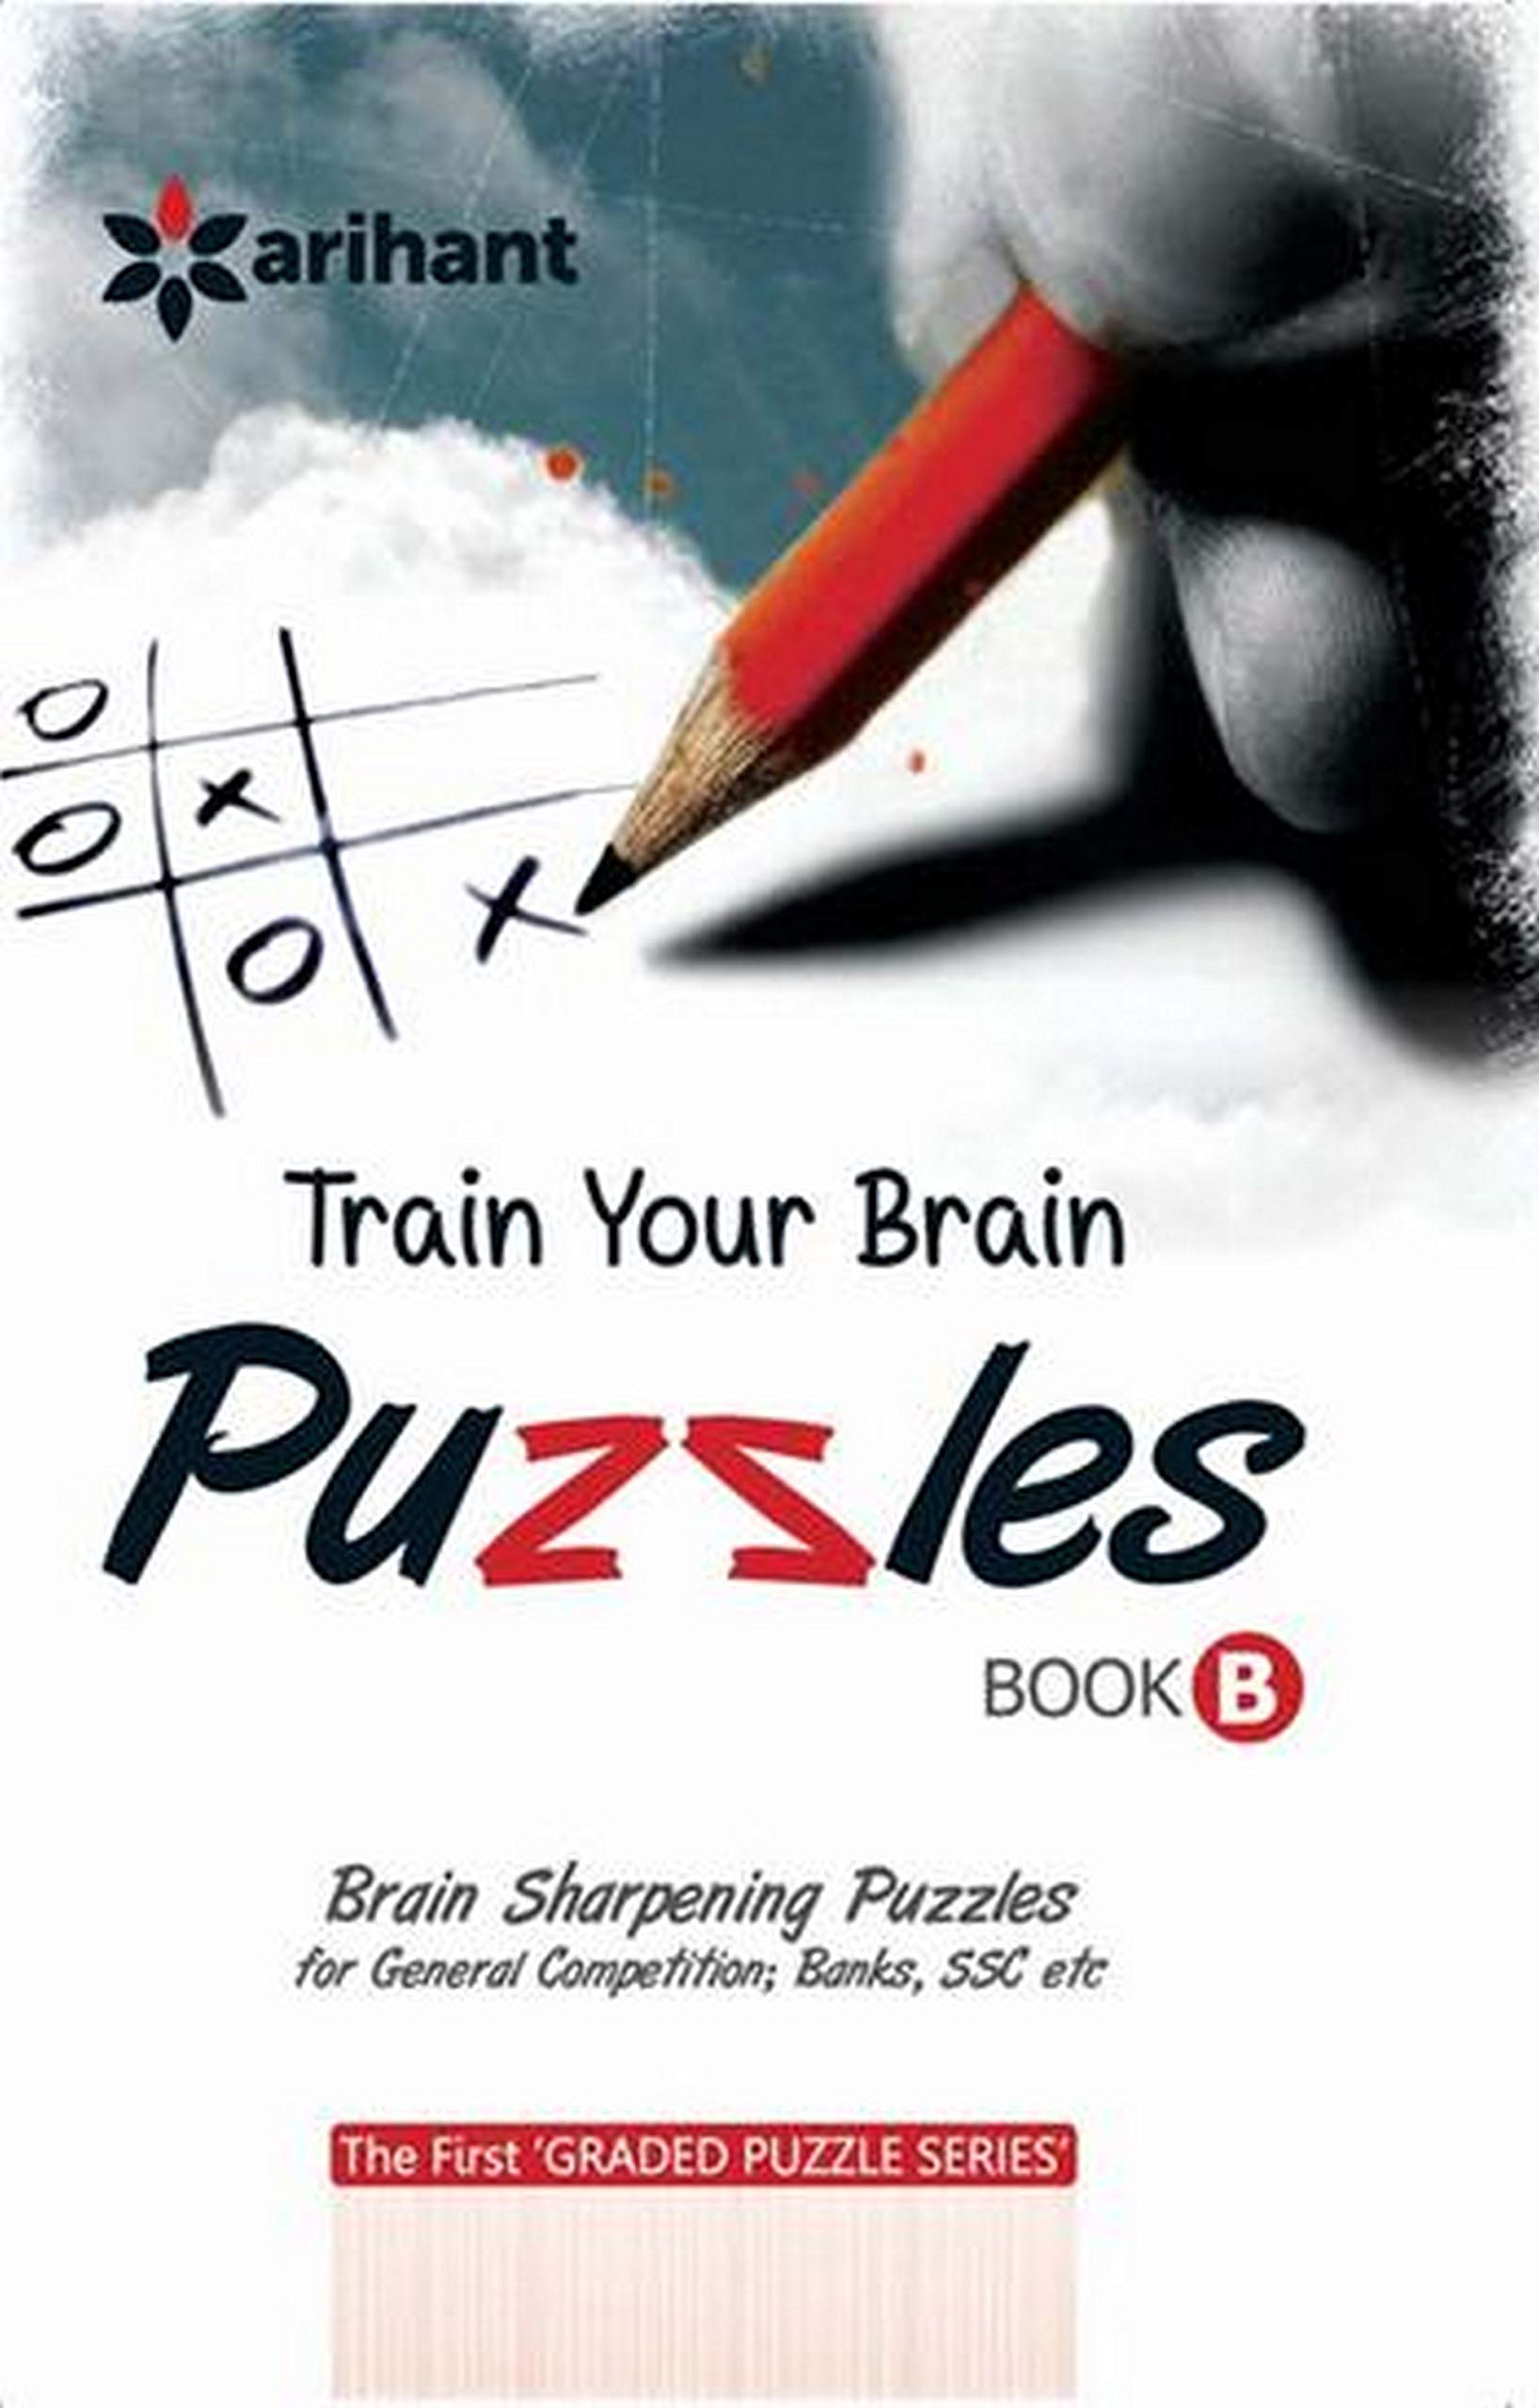 Train Your Brain Puzzles Book B